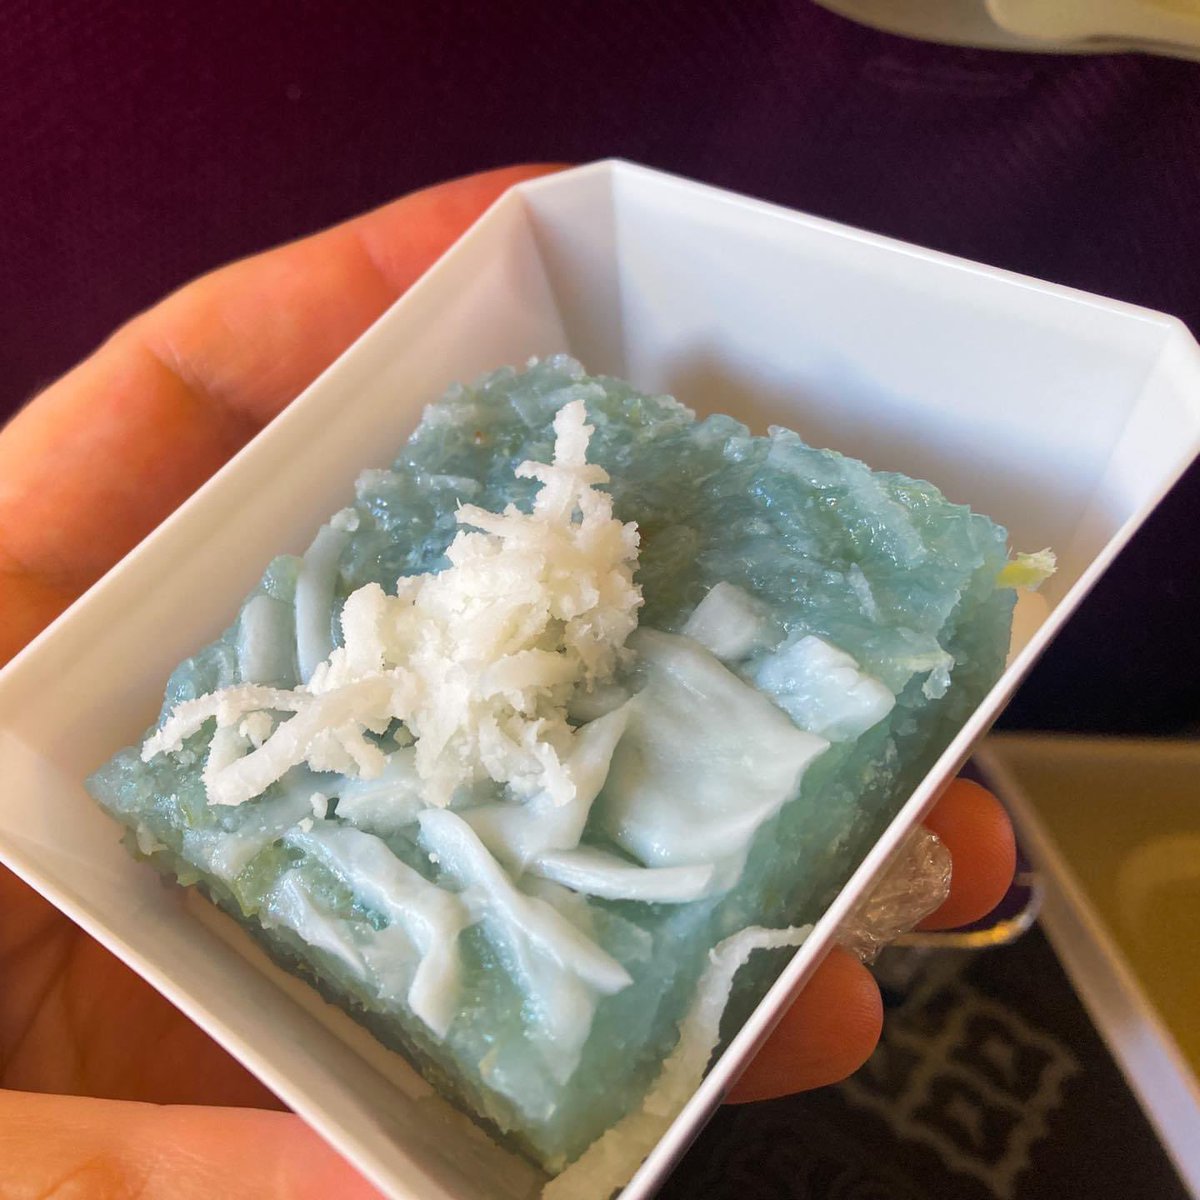 This light blue, gelatinous looking #dessert from #ThaiAirways was surprisingly good. It was filled with #StickyRice and #coconut.